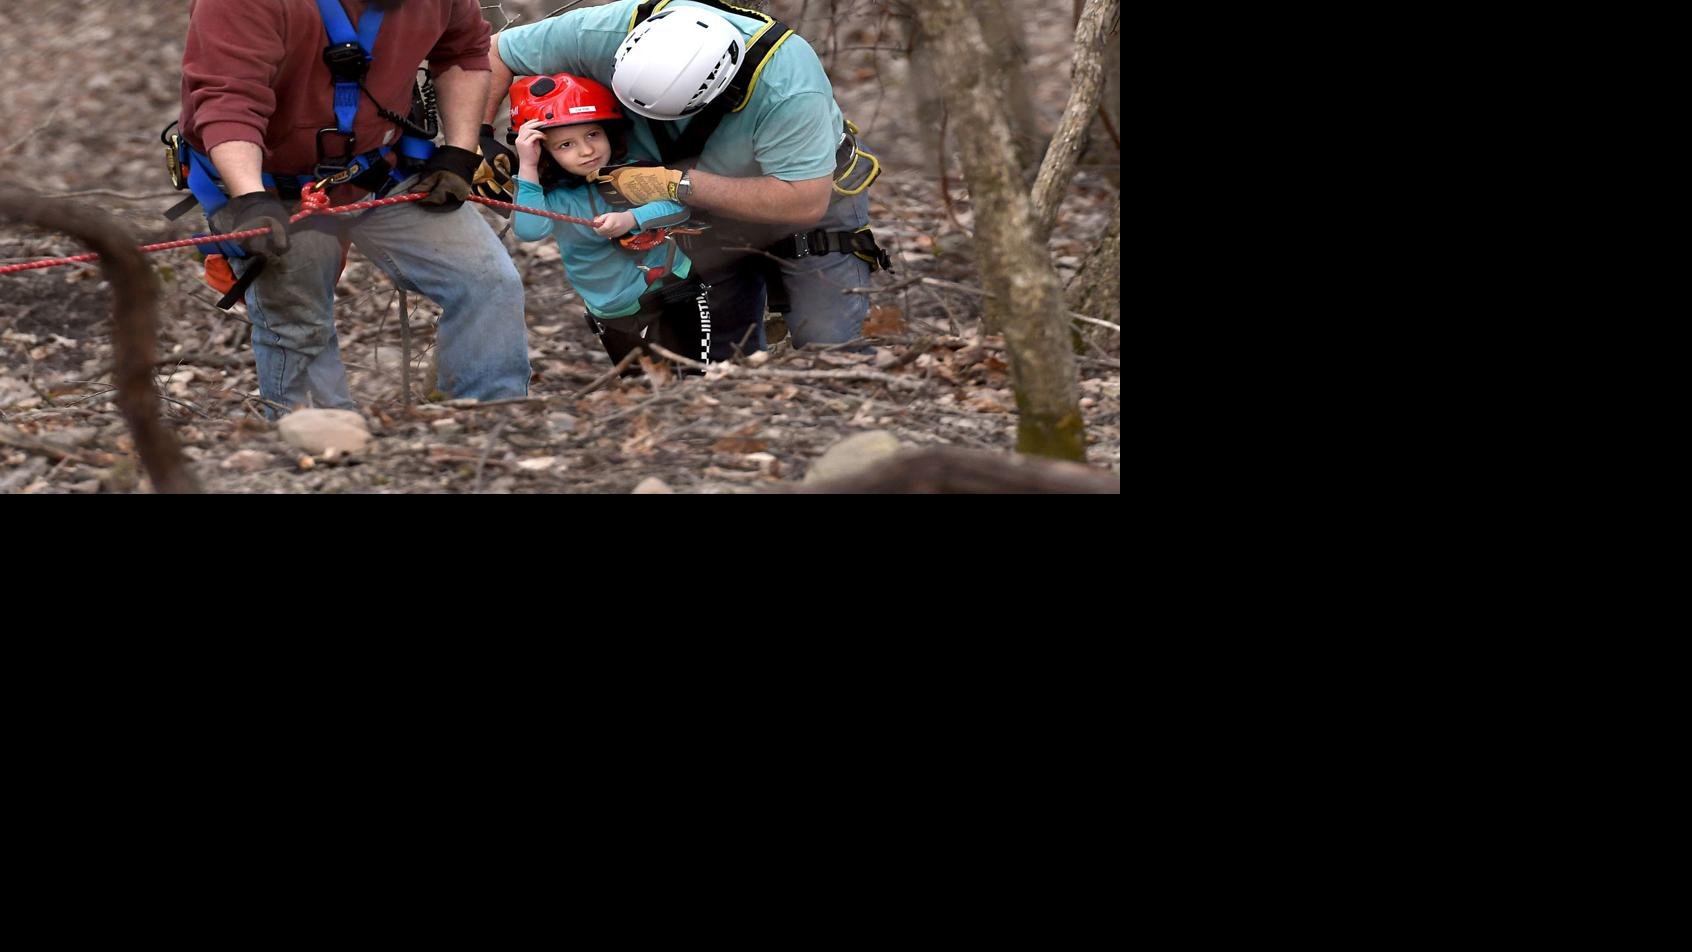 Gallery: Firefighters rescue mother and child stranded in a gorge in Niles - Auburn Citizen